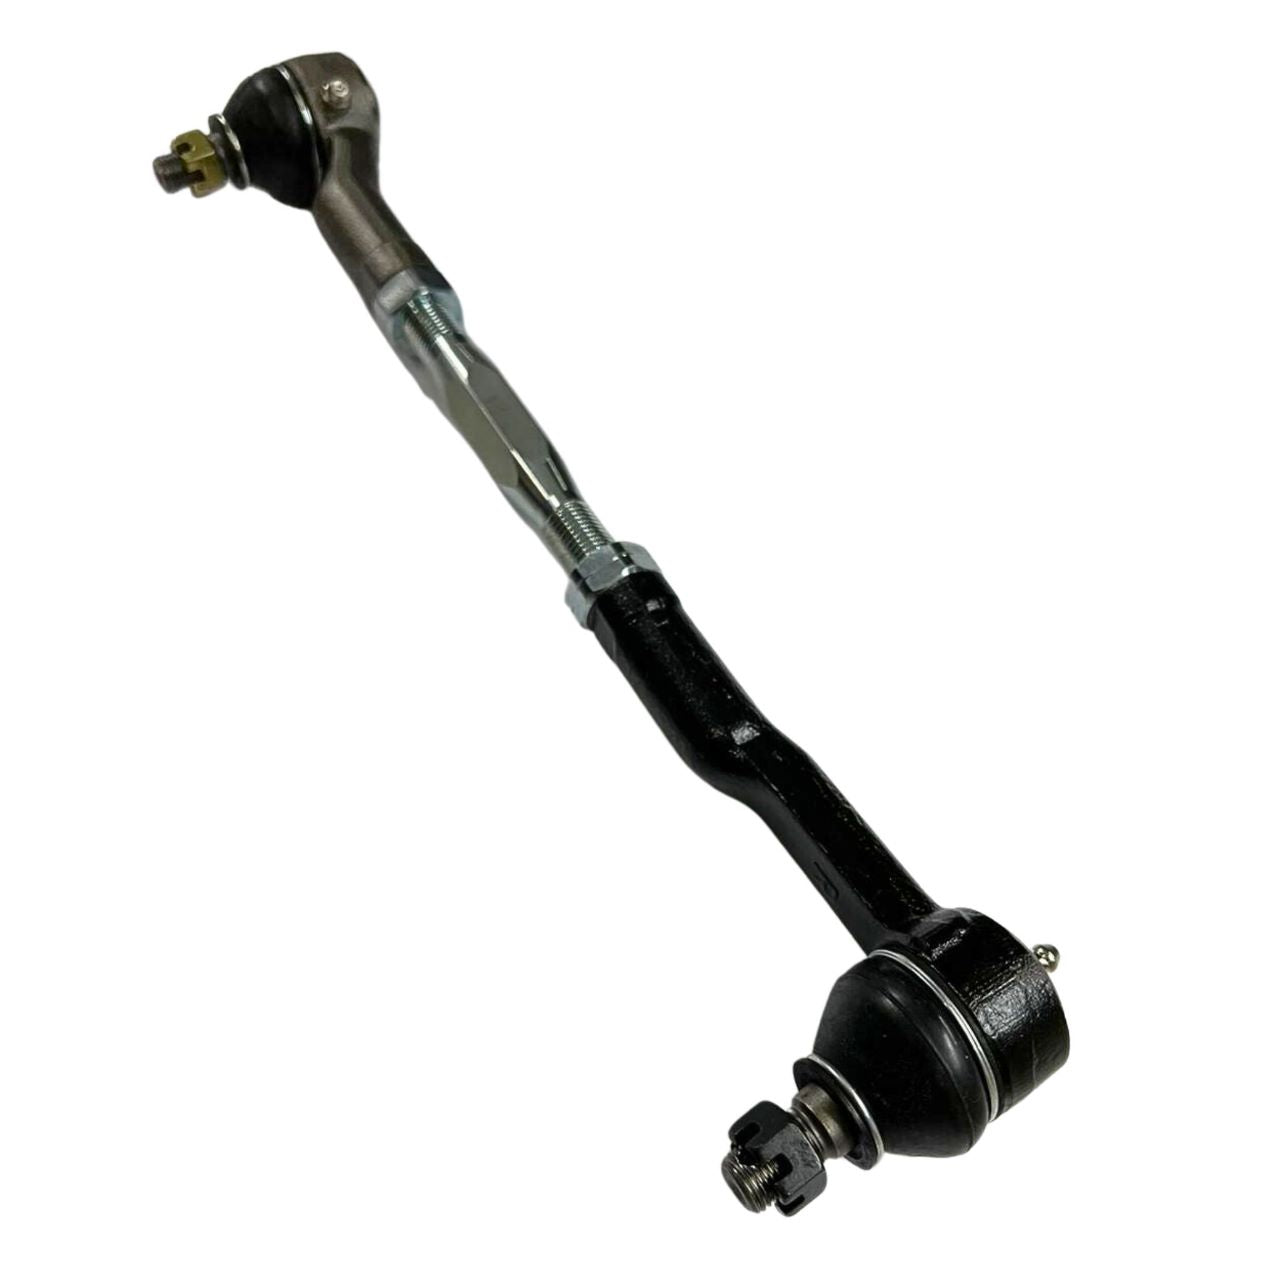 1600 180B RH side rod assembly complete with rod ends, tie rod & lock nuts